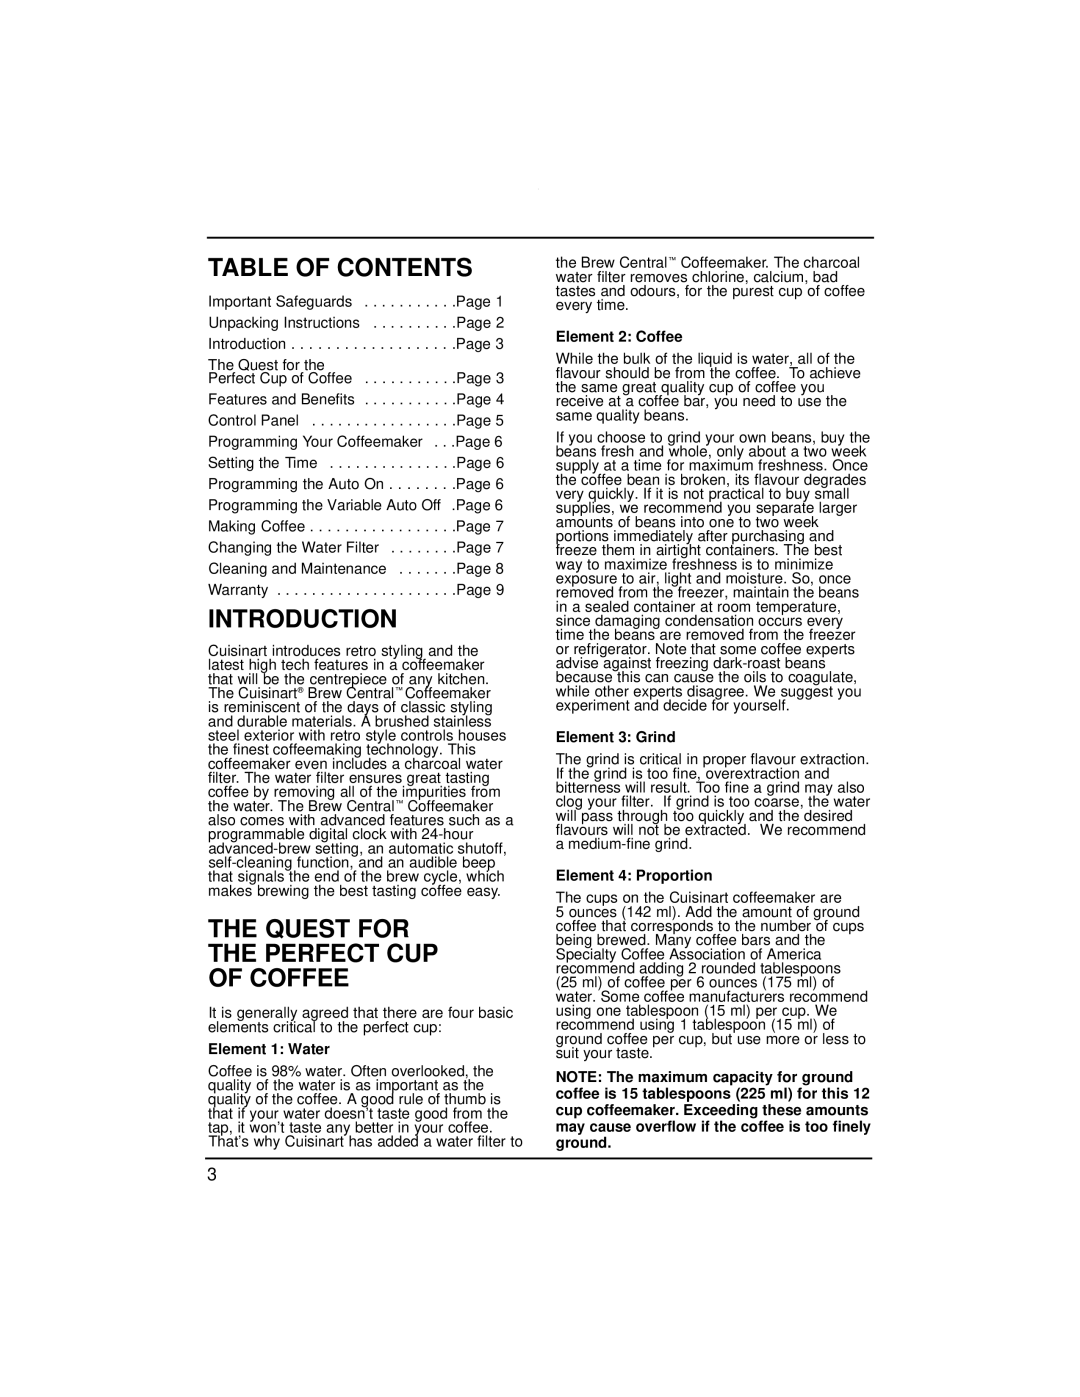 Cuisinart DCC-1200C manual Table of Contents, Introduction, Quest for Perfect CUP Coffee 